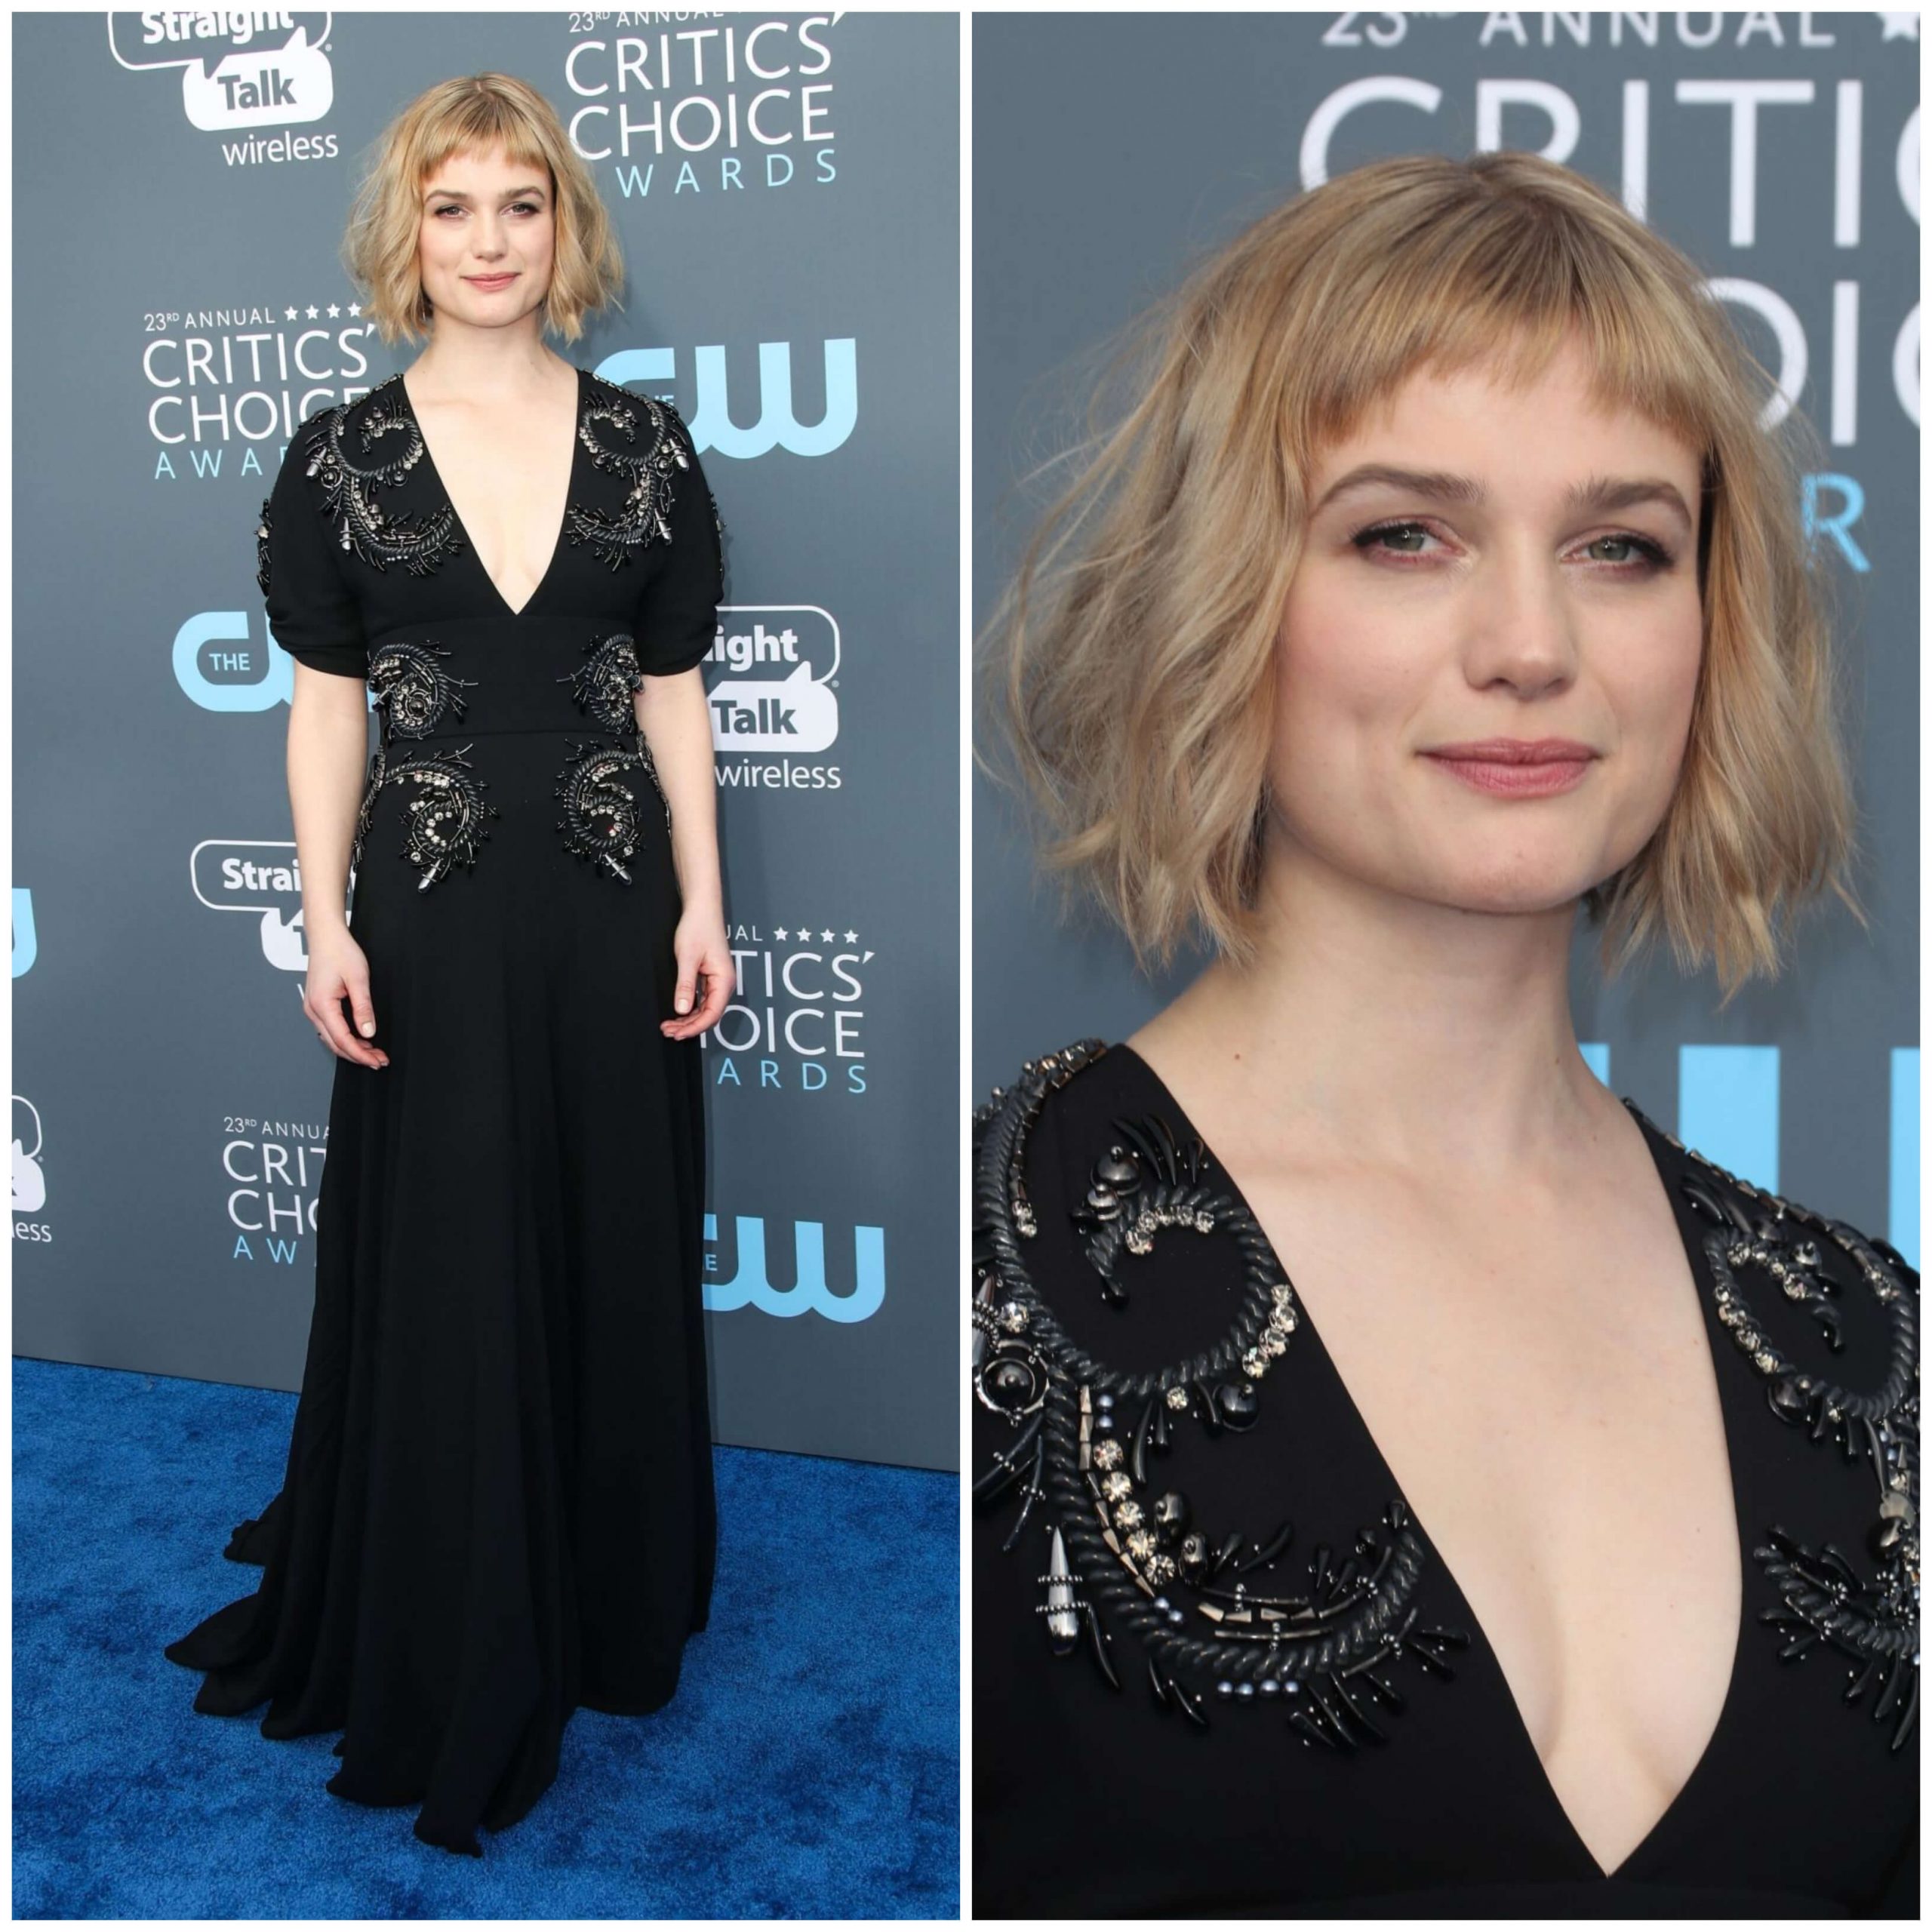 Alison Sudol - In Black Puffed Sleeves V Neckline Long Gown With Short Bang Hair